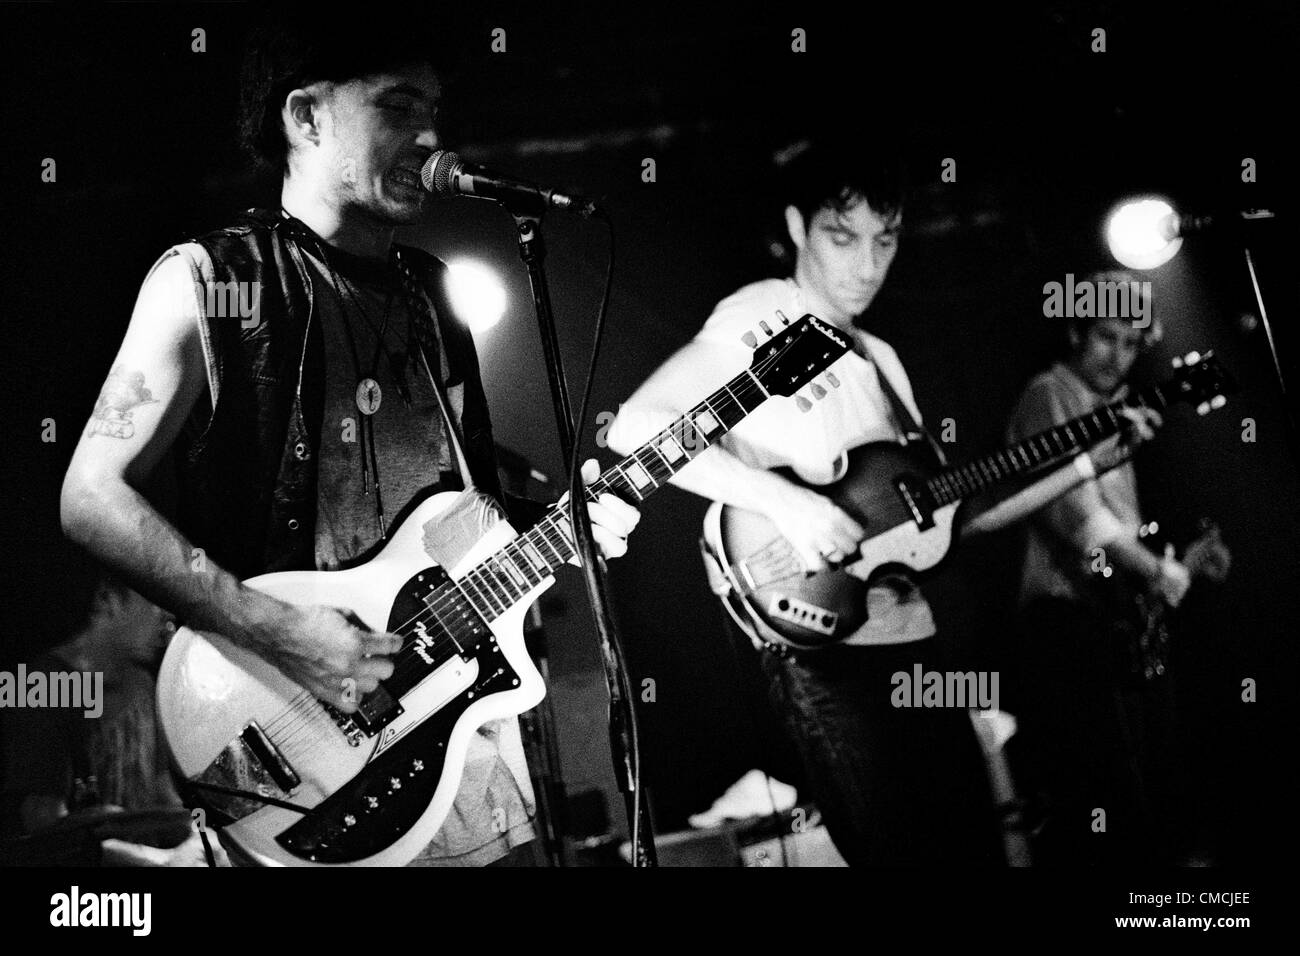 Chicago, Ill, U.S - From left, COLE ALEXANDER, JARED SWILLEY, and IAN SAINT PE, of The Black Lips perform at The Empty Bottle. (Credit Image: © Andrew A. Nelles/ZUMAPRESS.com) Stock Photo